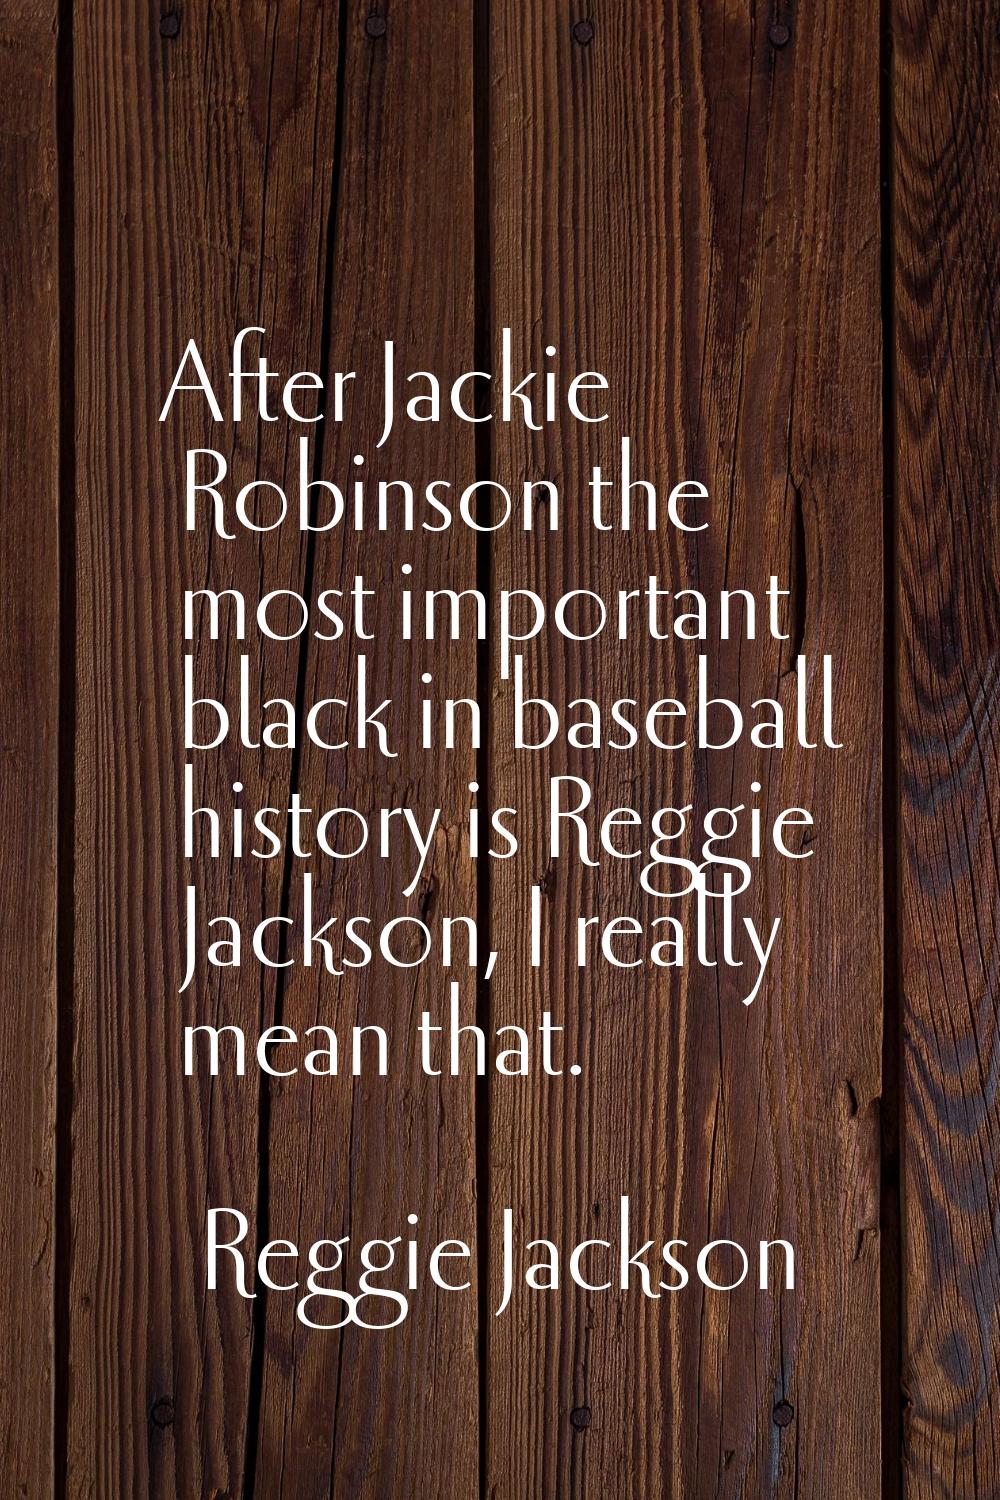 After Jackie Robinson the most important black in baseball history is Reggie Jackson, I really mean